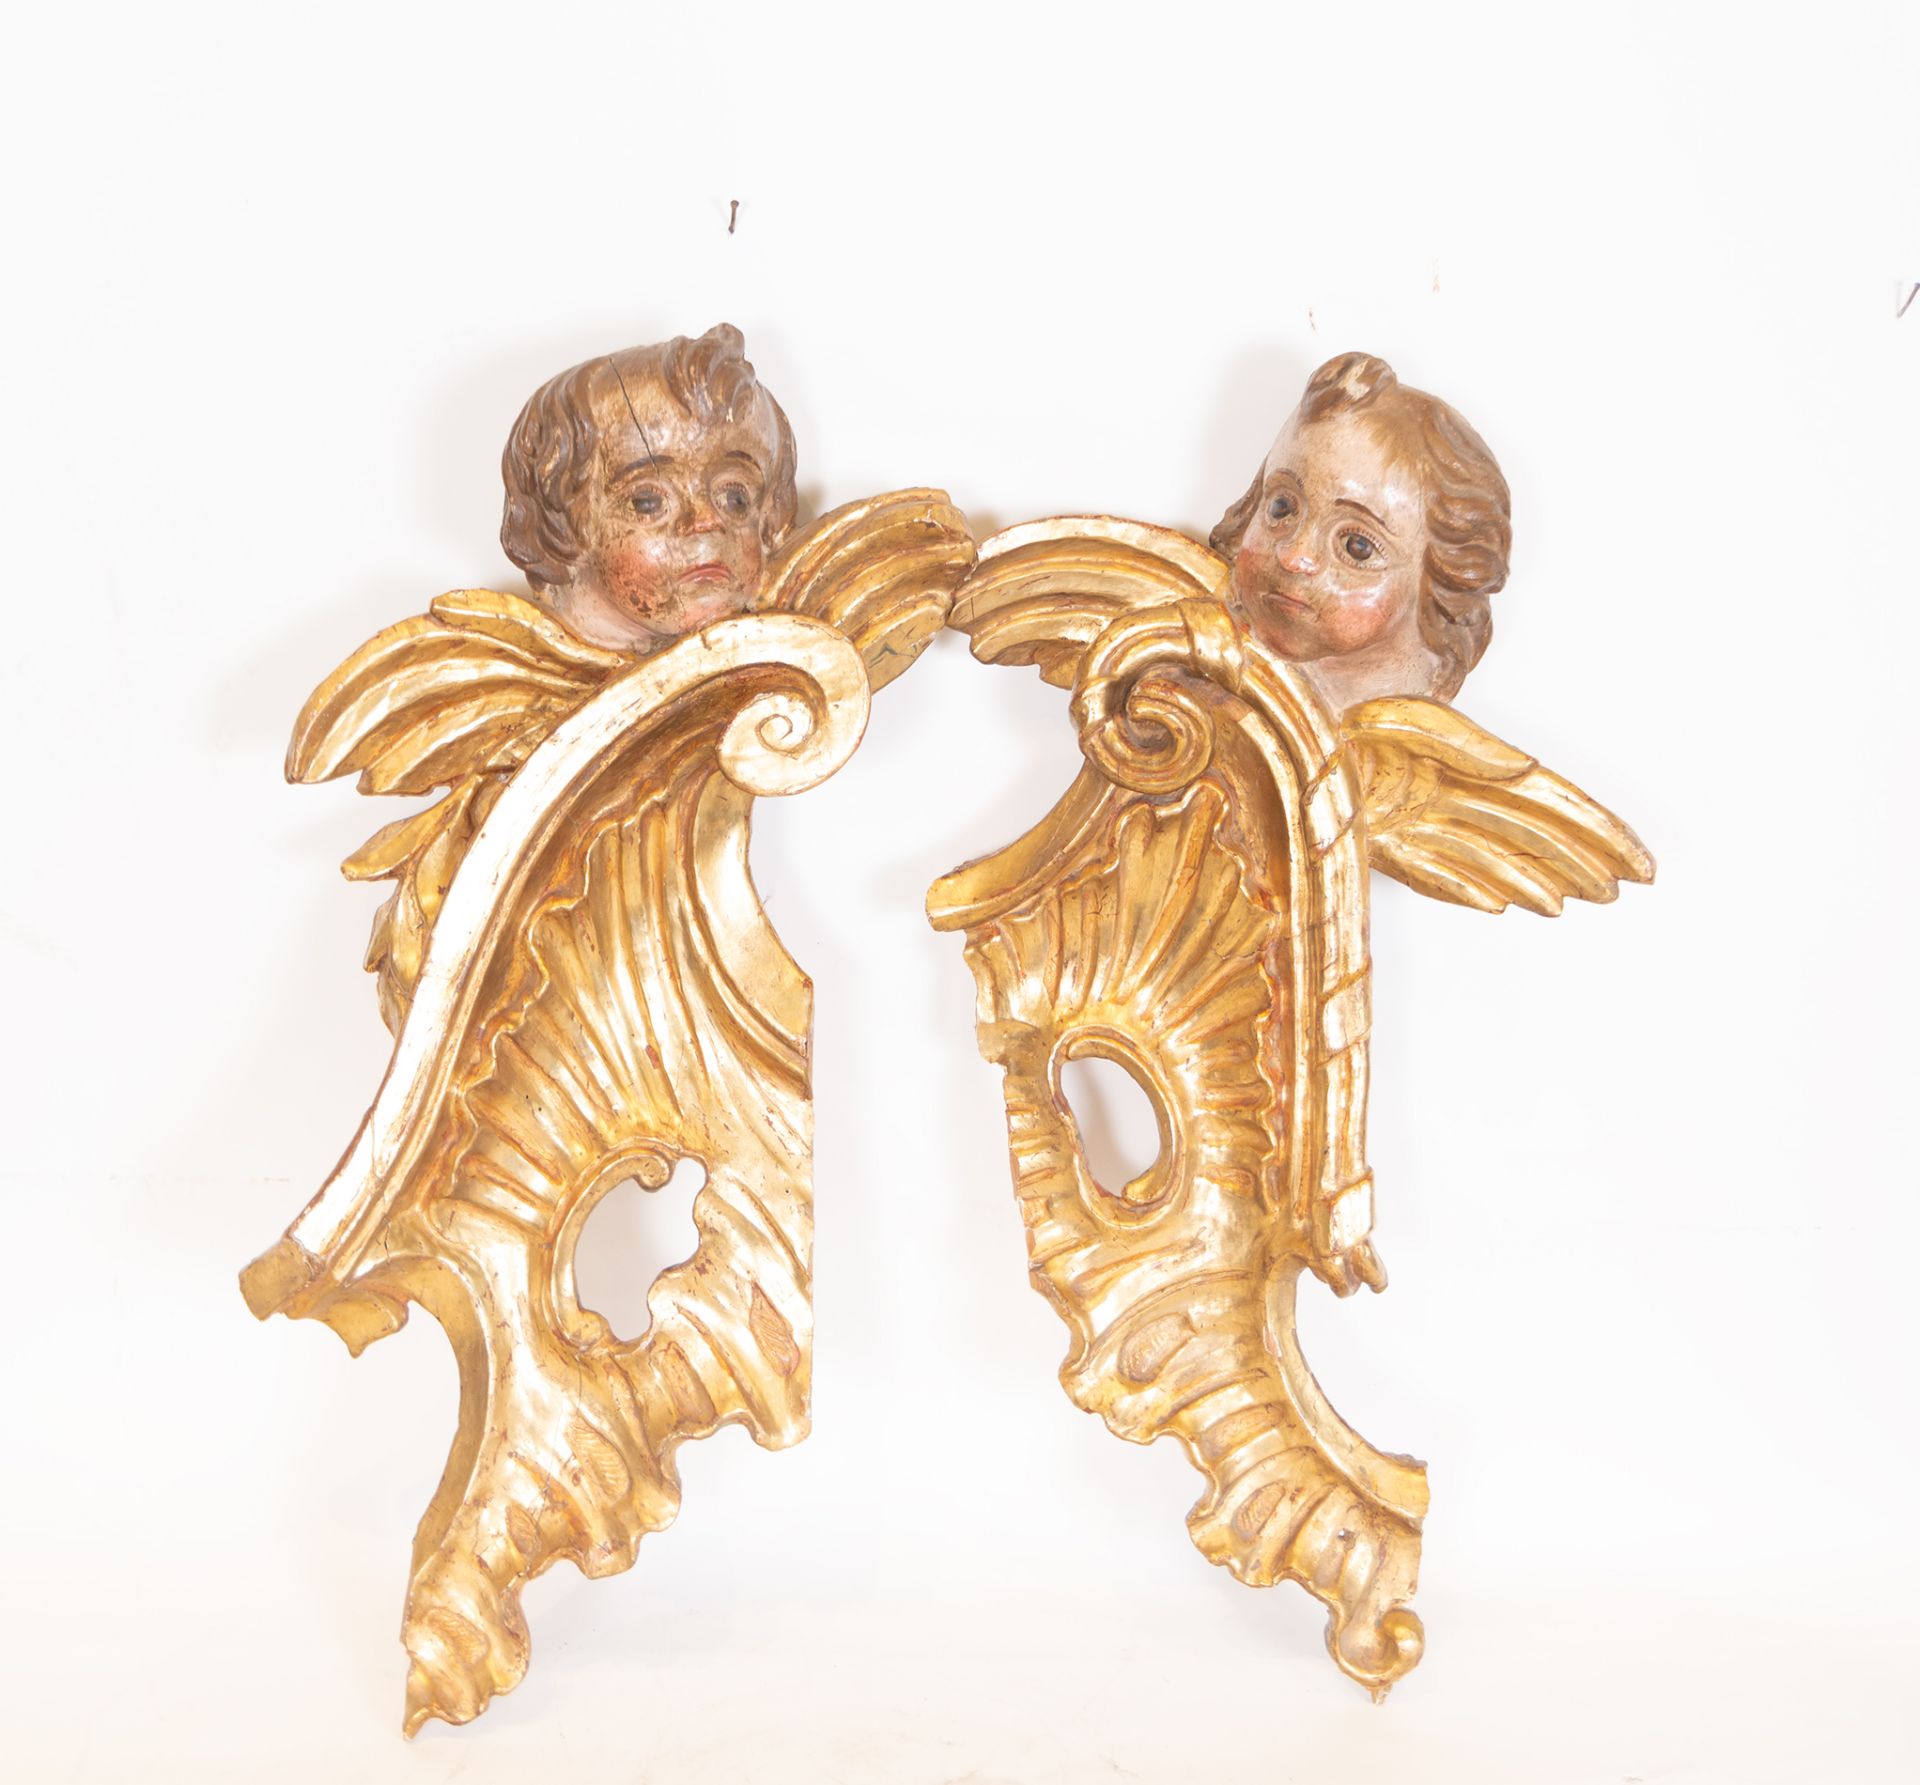 Pair of Rococo Wall Lamps in the shape of Angels, Andalusian school from the end of the 17th century